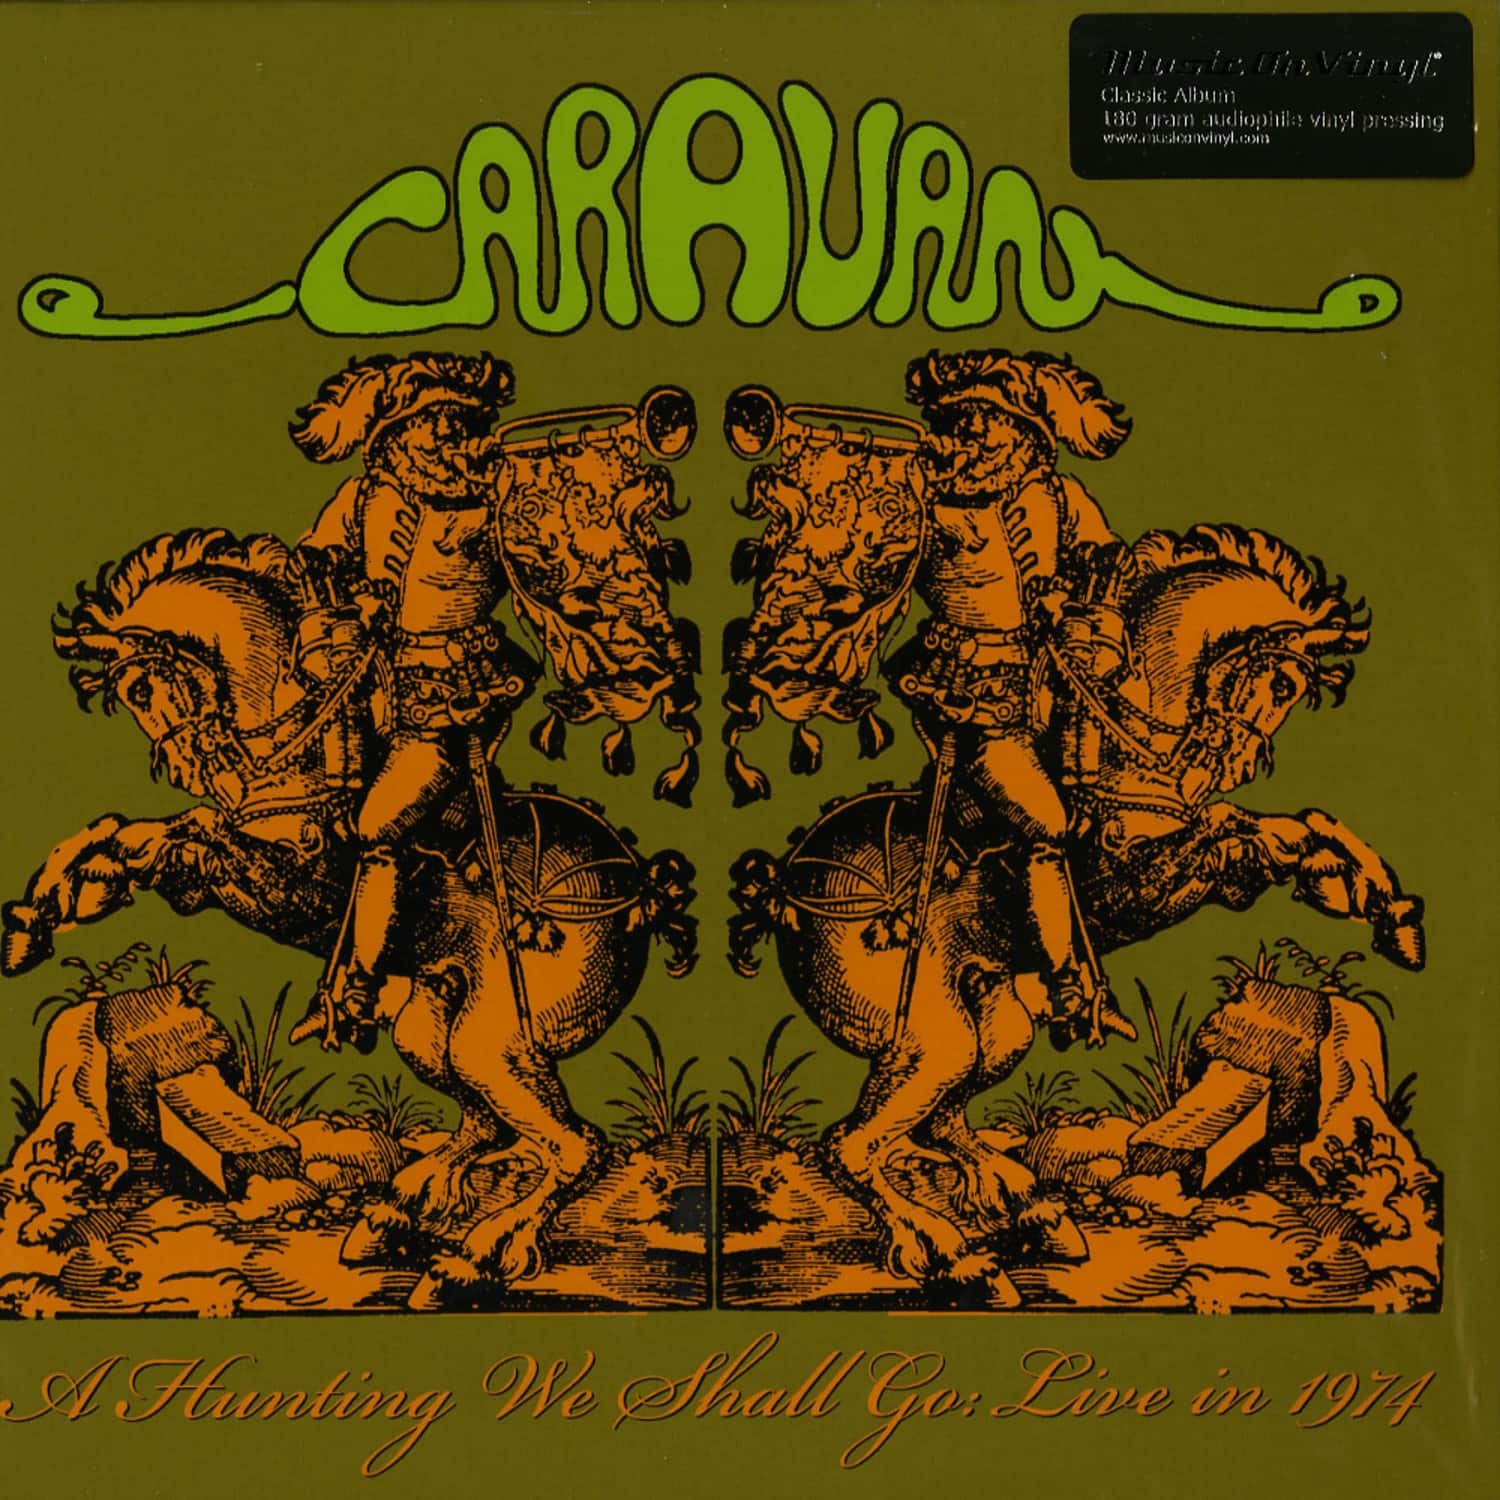 Caravan - A HUNTING WE SHALL GO : LIVE IN 1974 